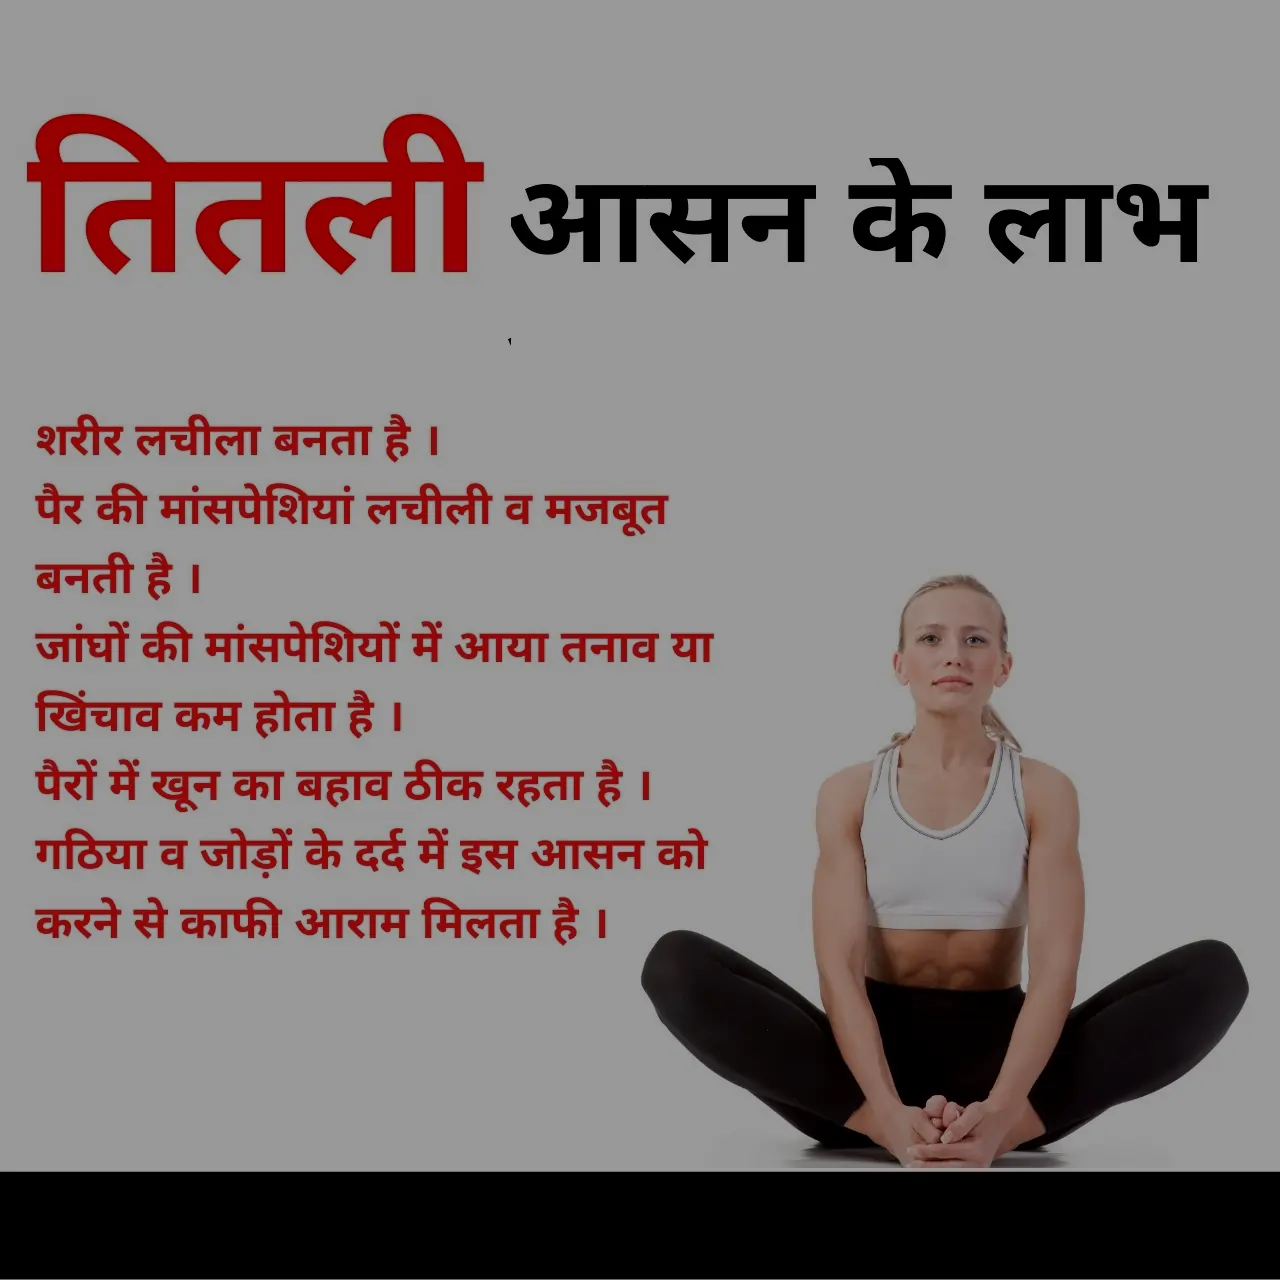 Yoga poses for hairs | Yoga facts, Learn yoga poses, All body workout